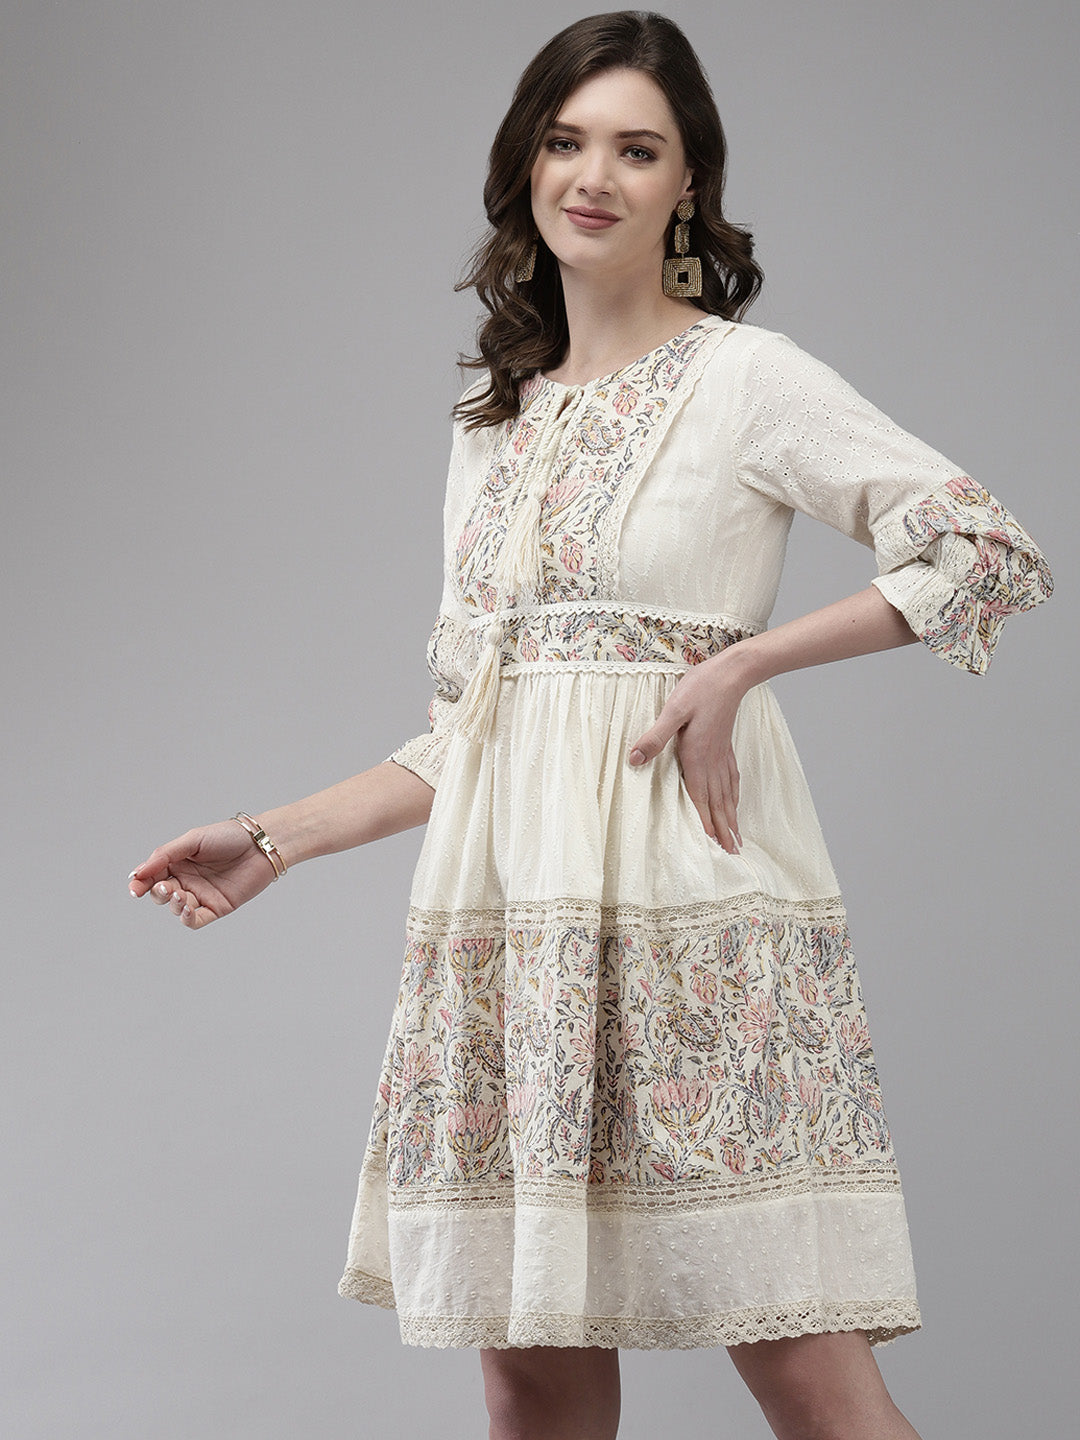 Ishin Women's Cotton Off White Embroidered A-Line Dress